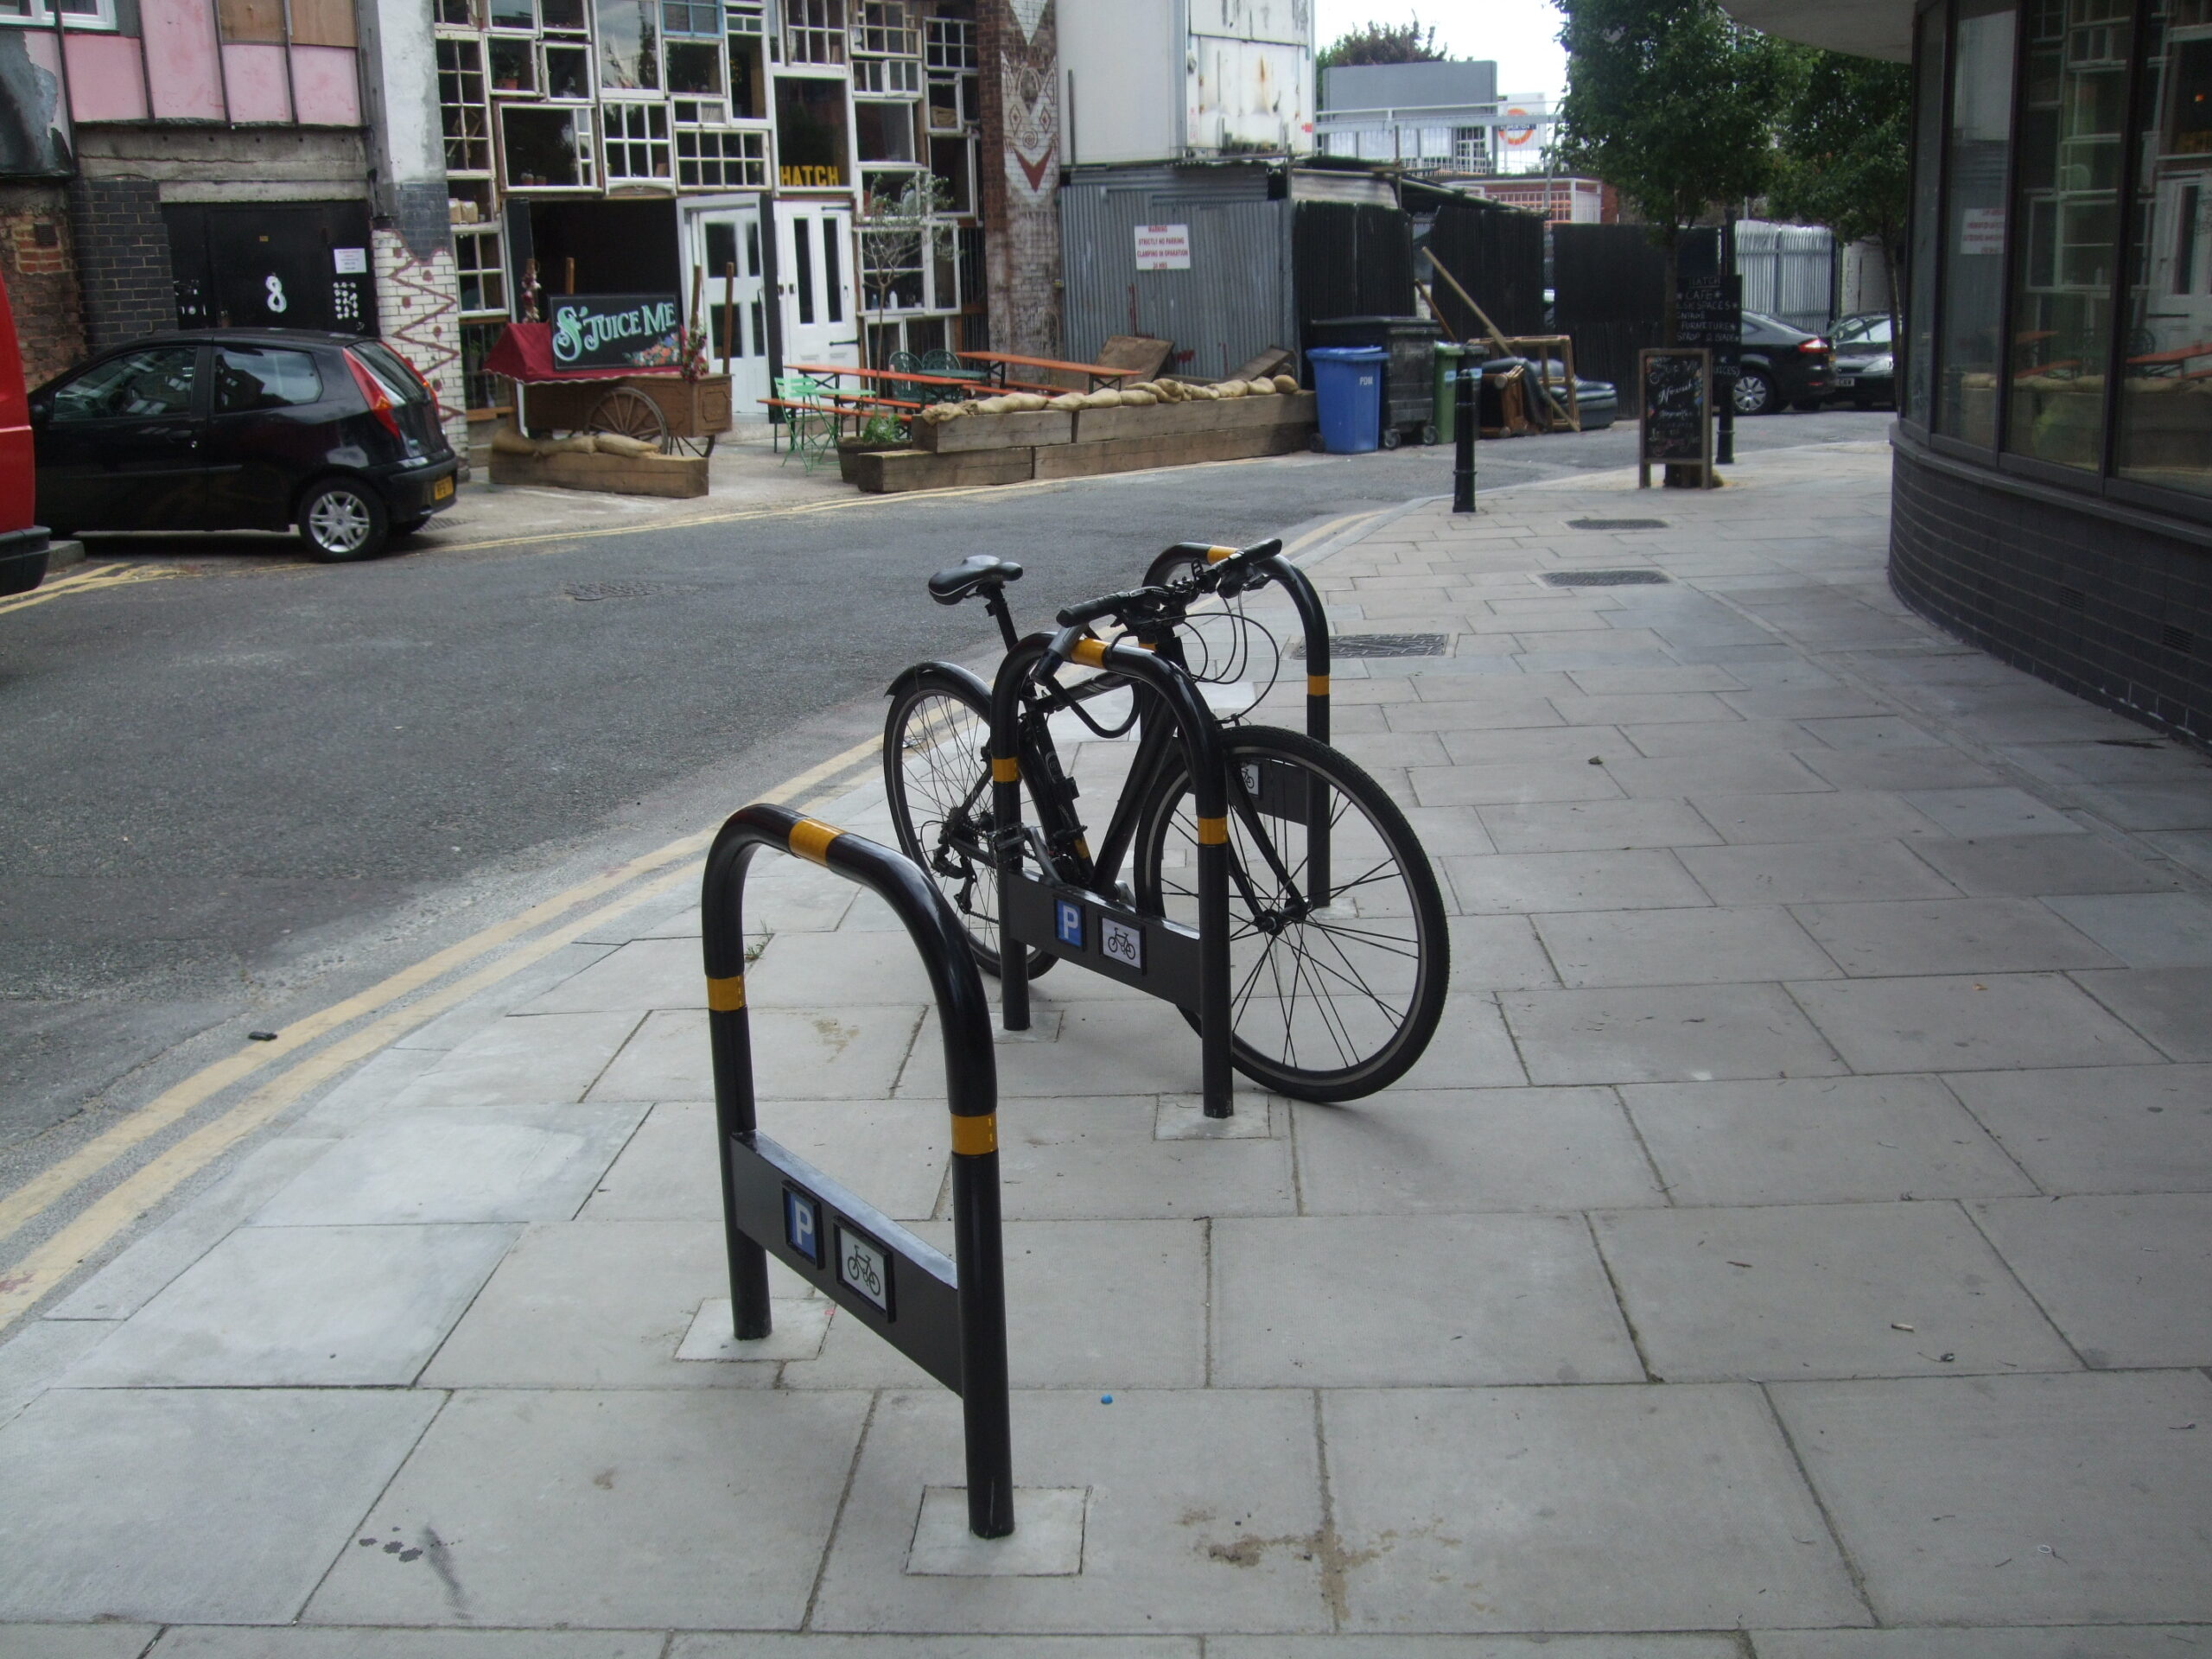 A black bicycle parked securely on a metal cycle stand, located on a footway.